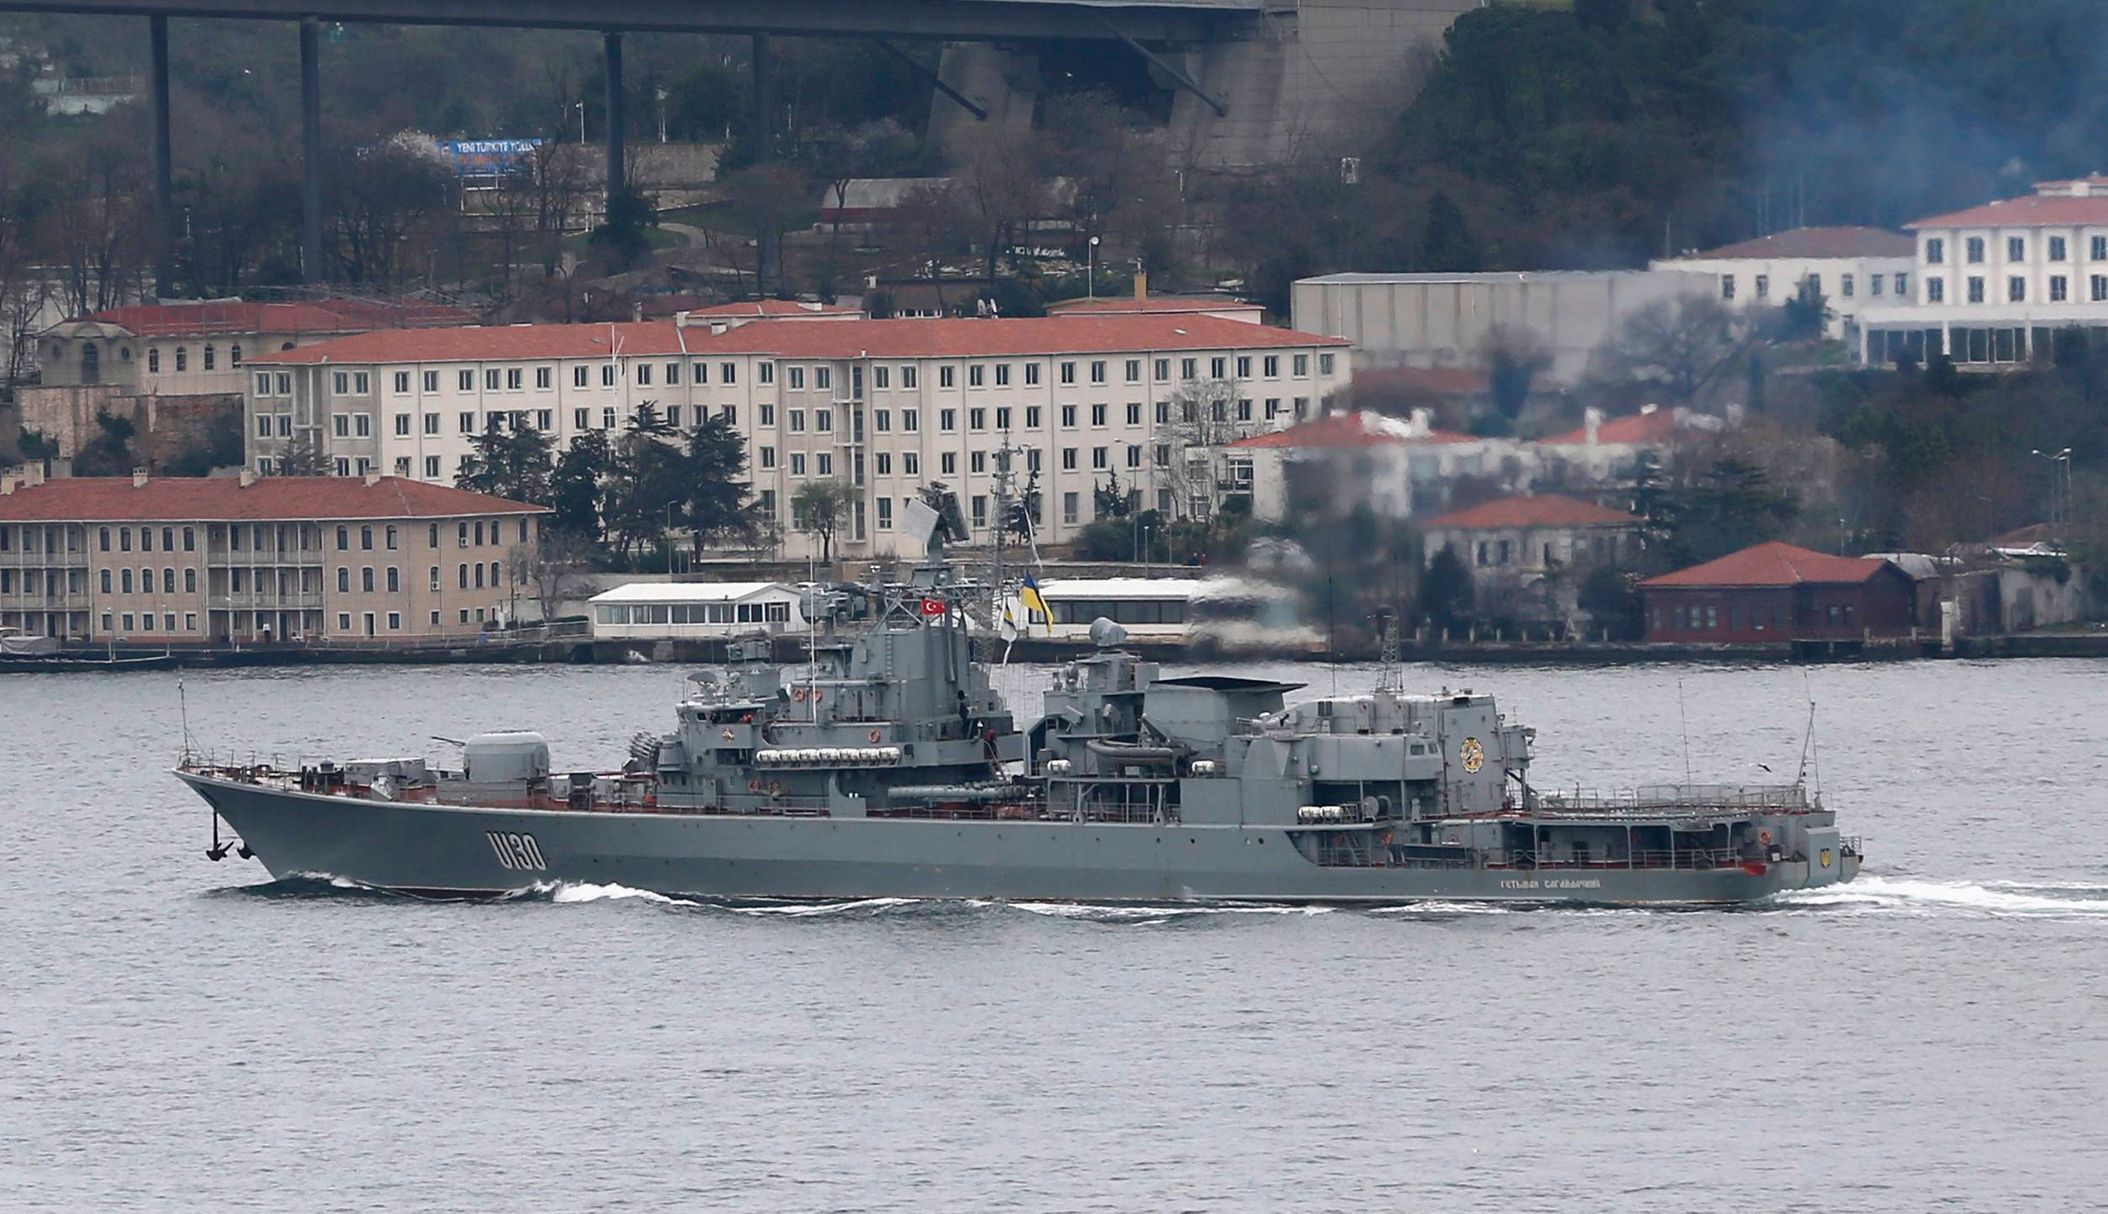 Ukraine Navy's flagship, the Hetman Sahaidachny frigate, sets sail in the Bosphorus on its way to Black Sea, in Istanbul